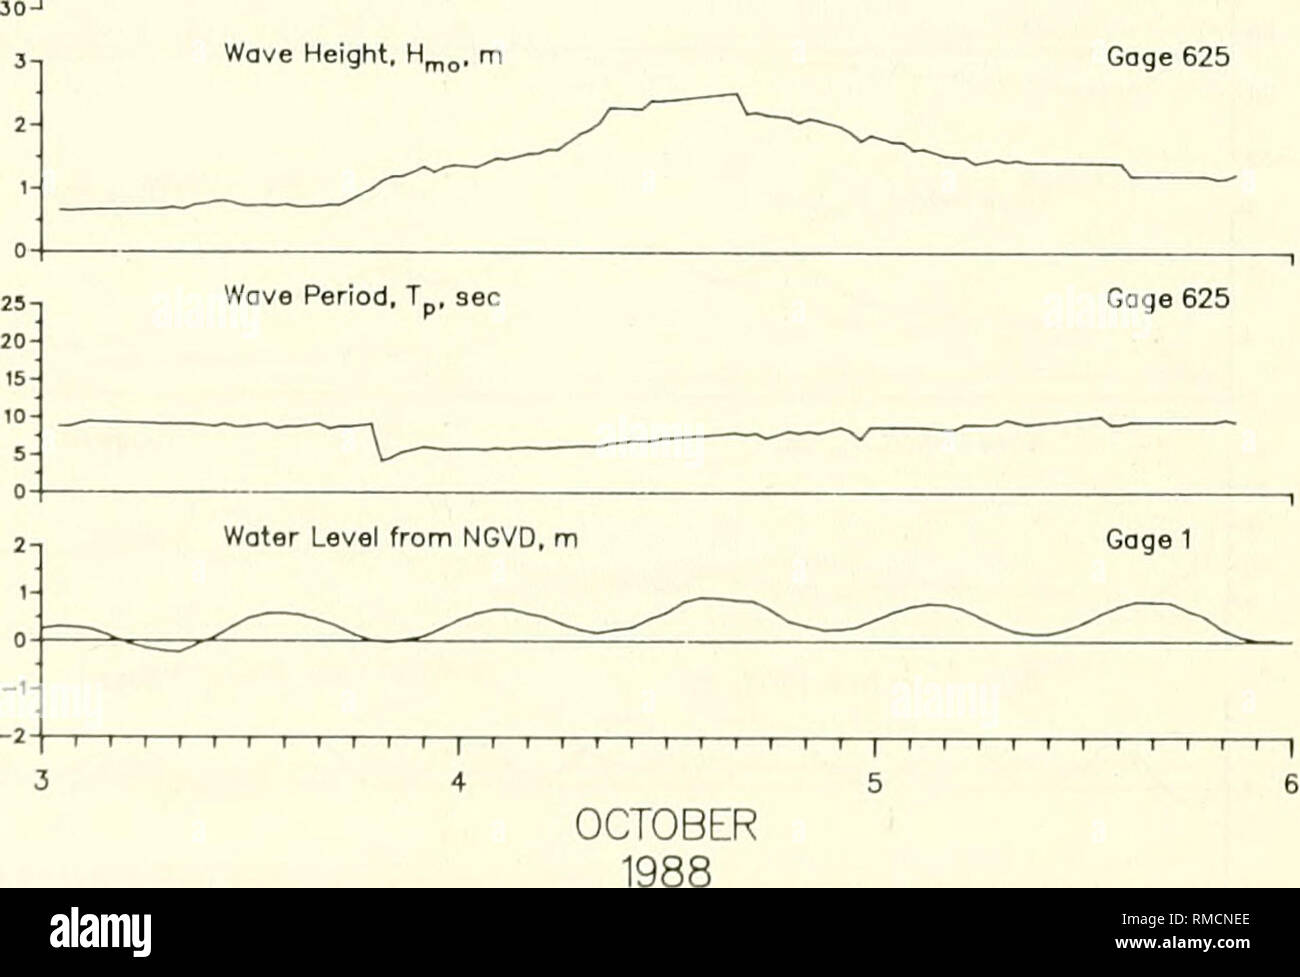 . Annual data summary for 1988 CERC Field Research Facility : volume 1, main text and appendixes A and B. Oceanography; Meteorology; Ocean waves; Ocean currents. 4 October 1988 (Figure 37) 75. On 3 October, this storm developed in the Gulf of Mexico off the Florida coast, quickly intensified as it moved up the eastern coast, and was located off Cape Hatteras, NC, early on 4 October. By the morning of 5 Octo- ber, it was located off the New England coast. Maximum winds (from north- northeast) exceeding 16 m/sec peaked at 1000 EST on 4 October, and the maximum Hmo (Gage 625) of 2.29 m (Tp = 6.56 Stock Photo